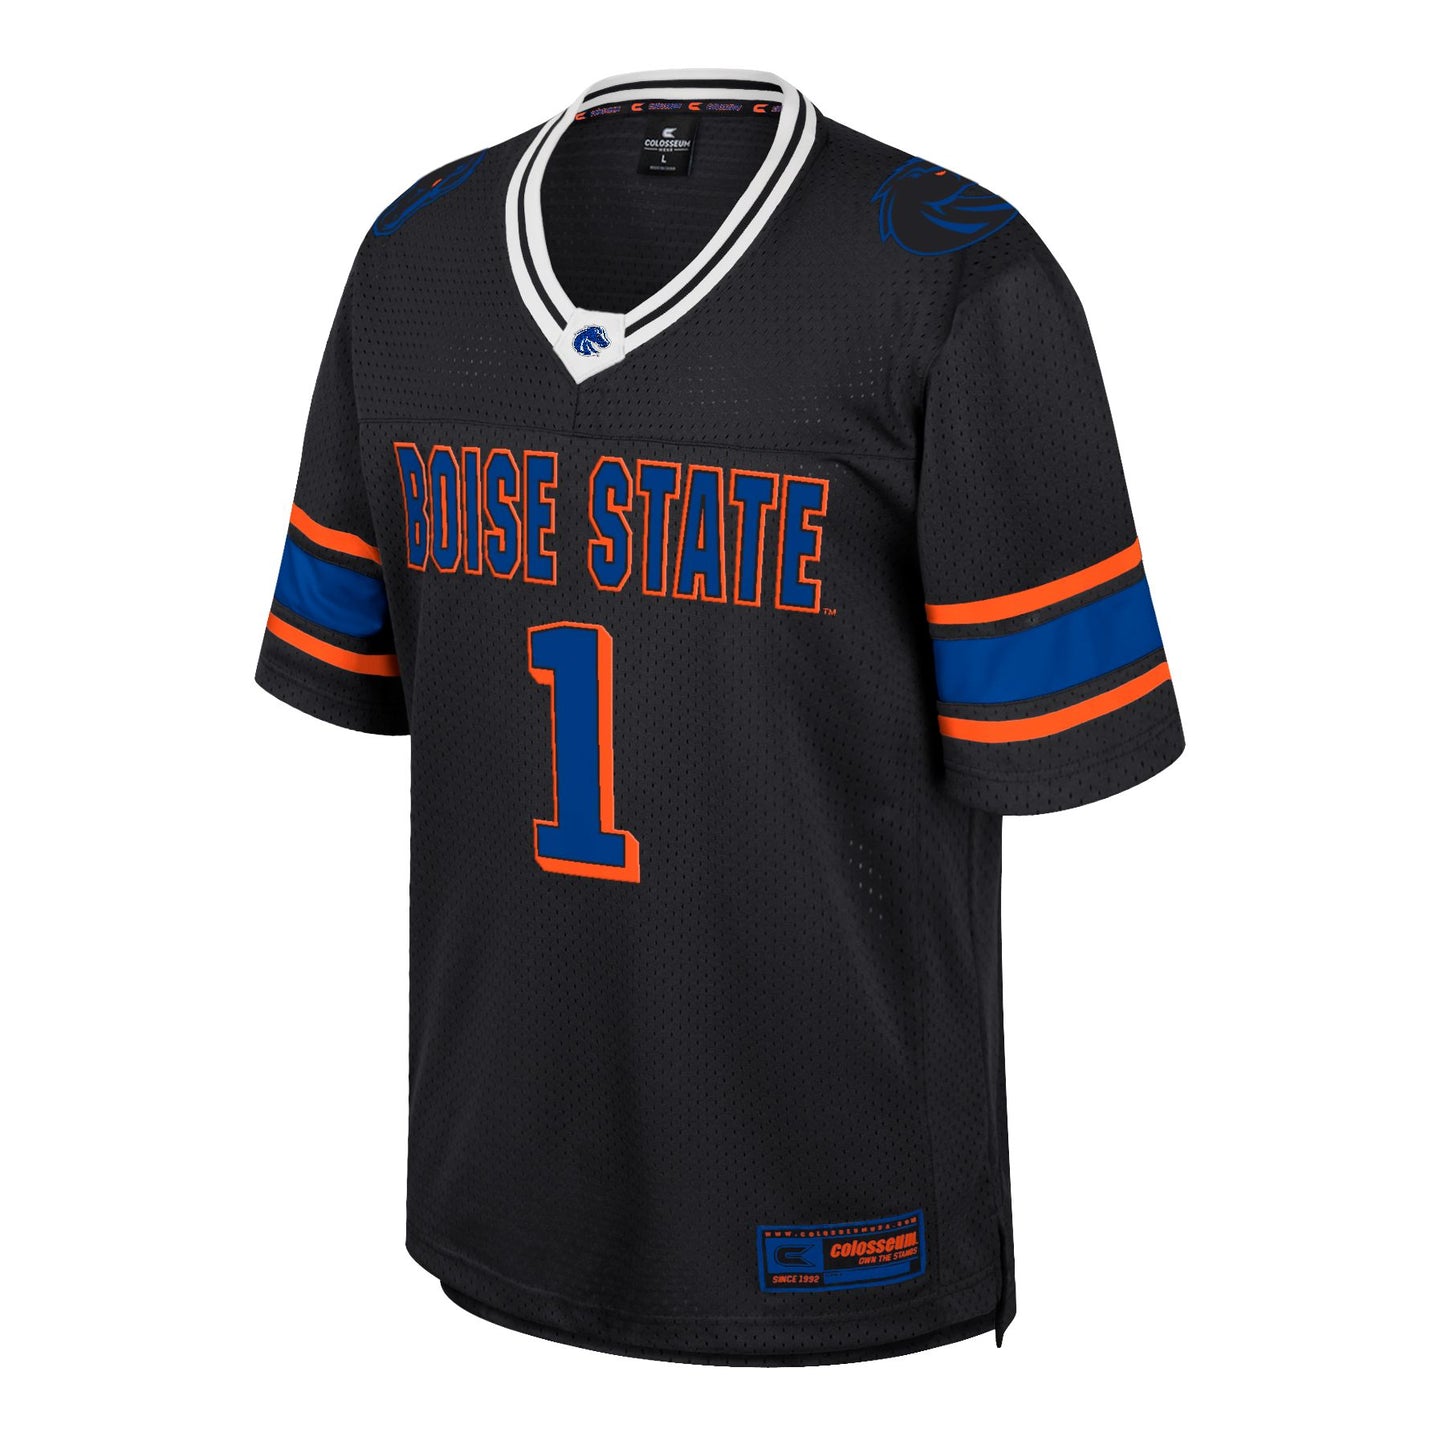 Boise State Broncos Colosseum Youth Retro Football Fan Jersey (Black)